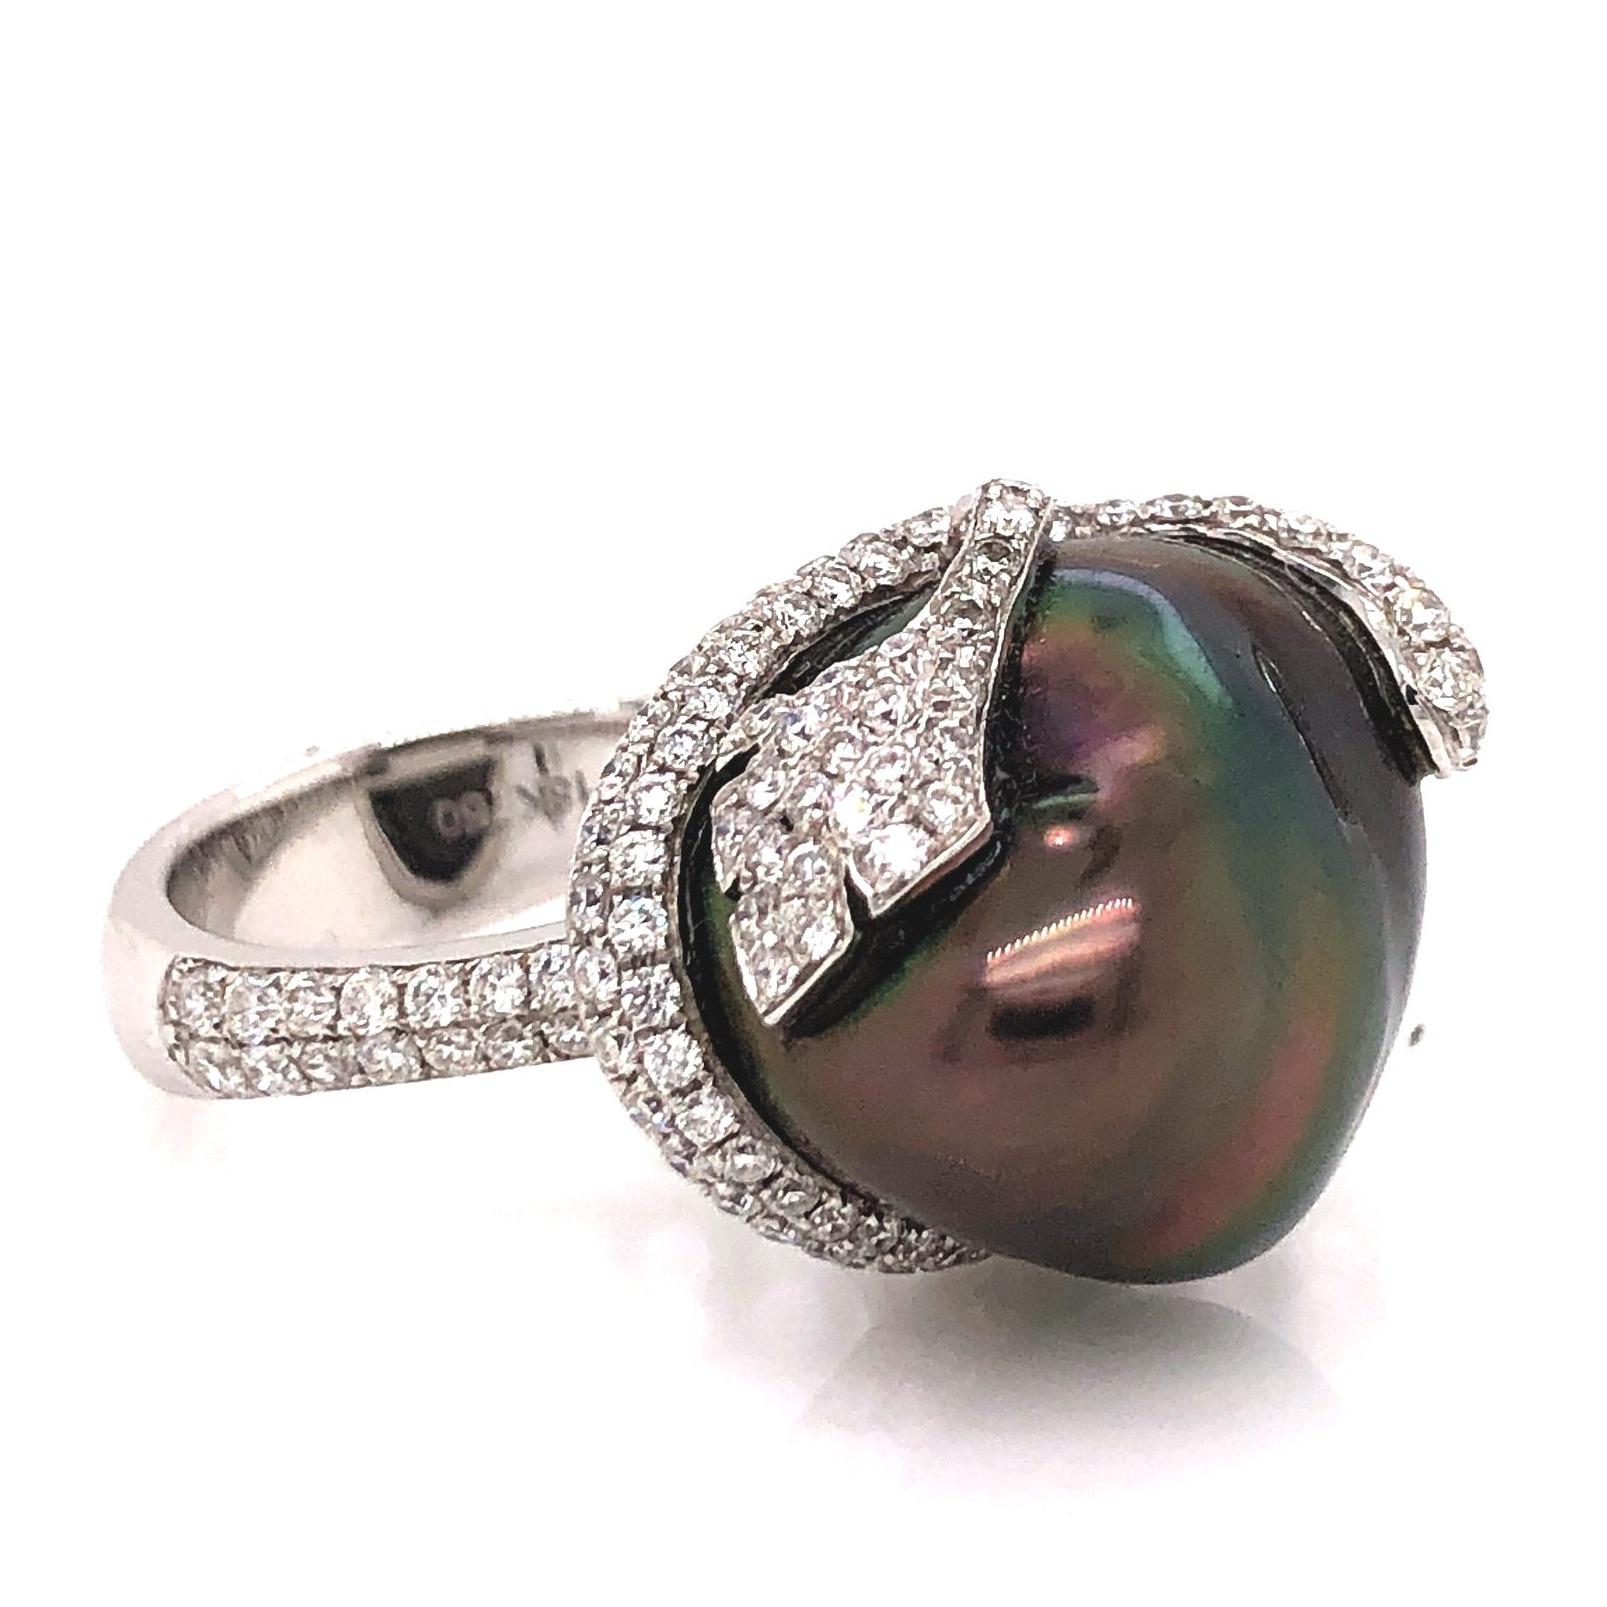 This ASBA Collection Ring features a AAA fine nacre and luster Tahitian Keshi Pearl, surrounded by a total of 1.29 ct. tw. of F Color, VS1 clarity pavé diamond accents. Expertly crafted in 14k white gold, this one-of-a-kind statement ring is sized